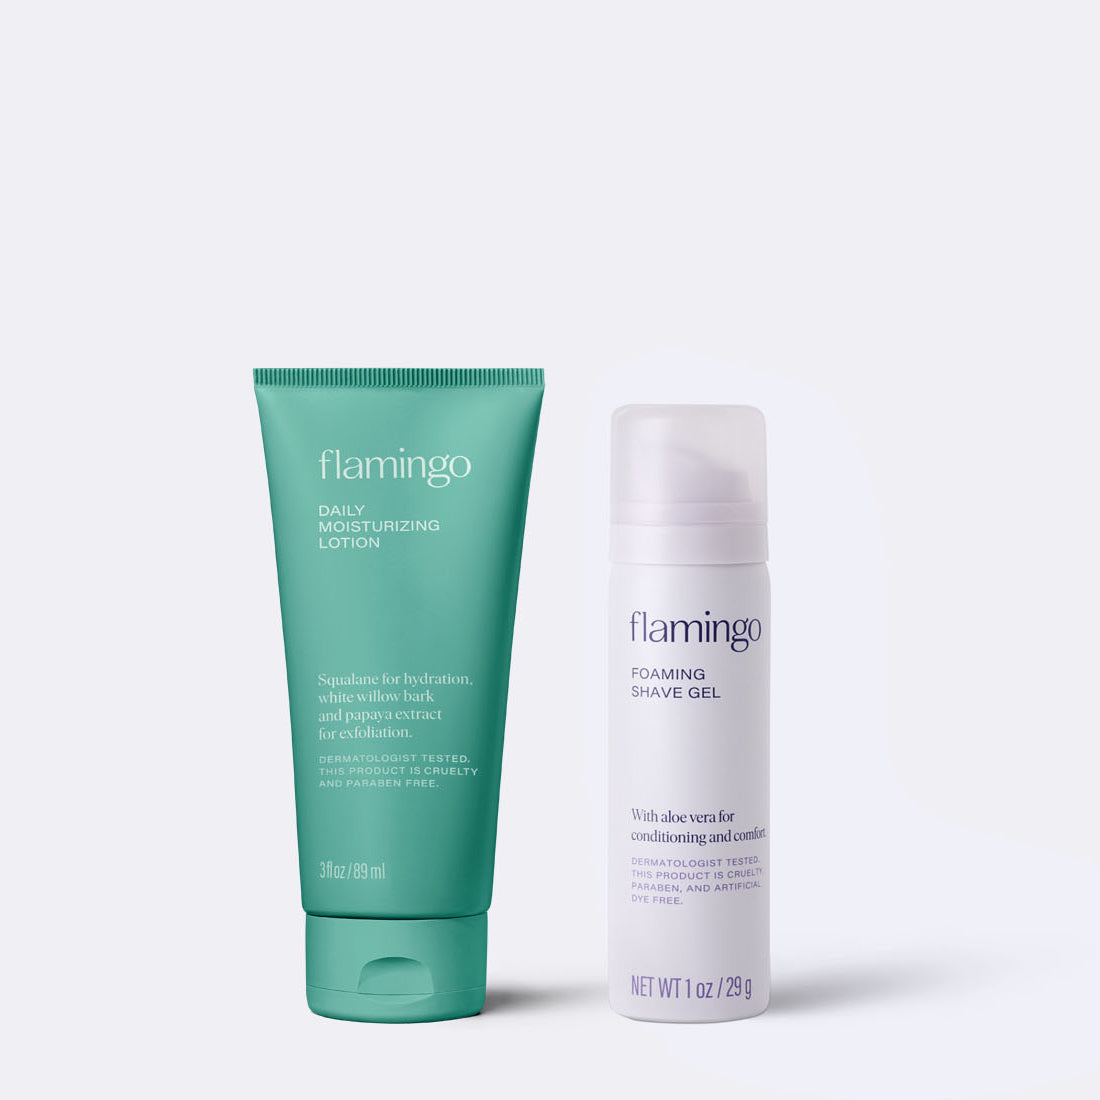 A green tube of Mini Daily Moisturizing Lotion and a light grey can of Mini Foaming Shave Gel